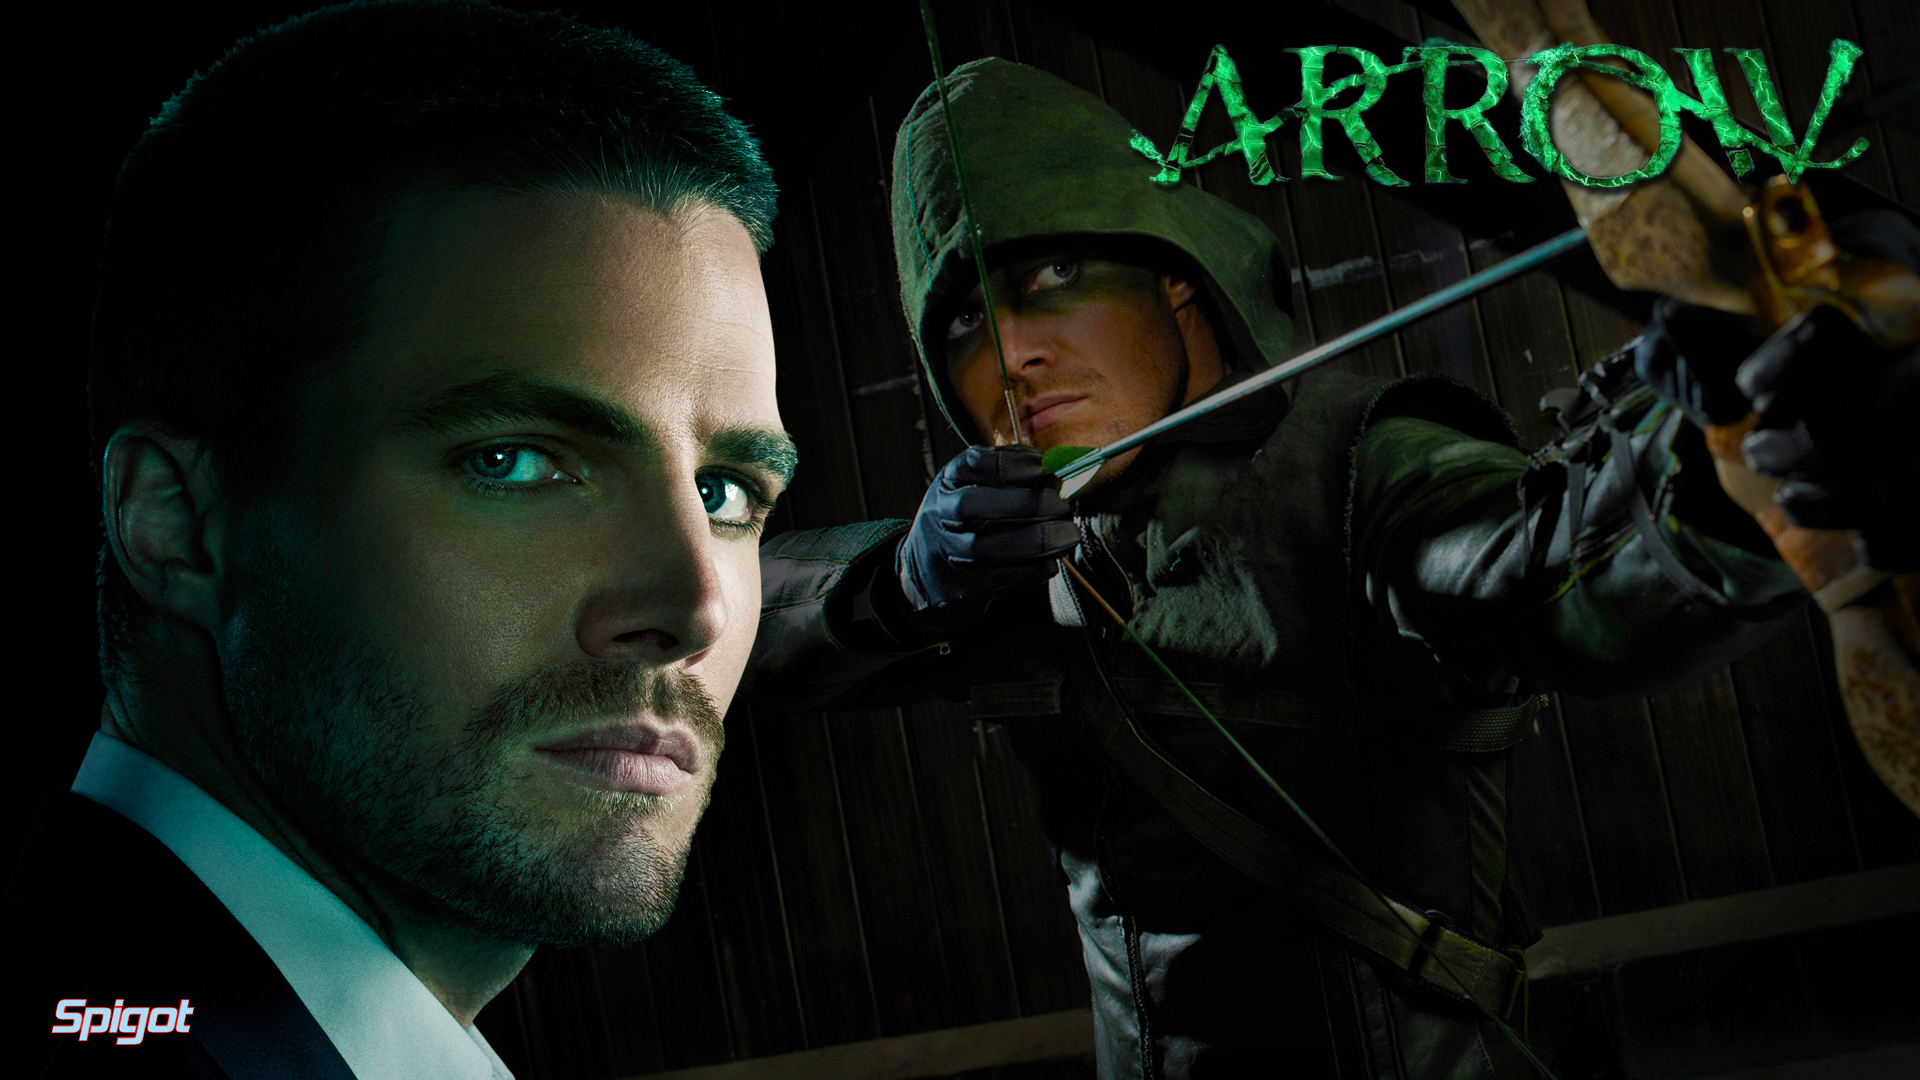 More Wallpaper S Of The Awesome Cw Show Arrow And Here They Are